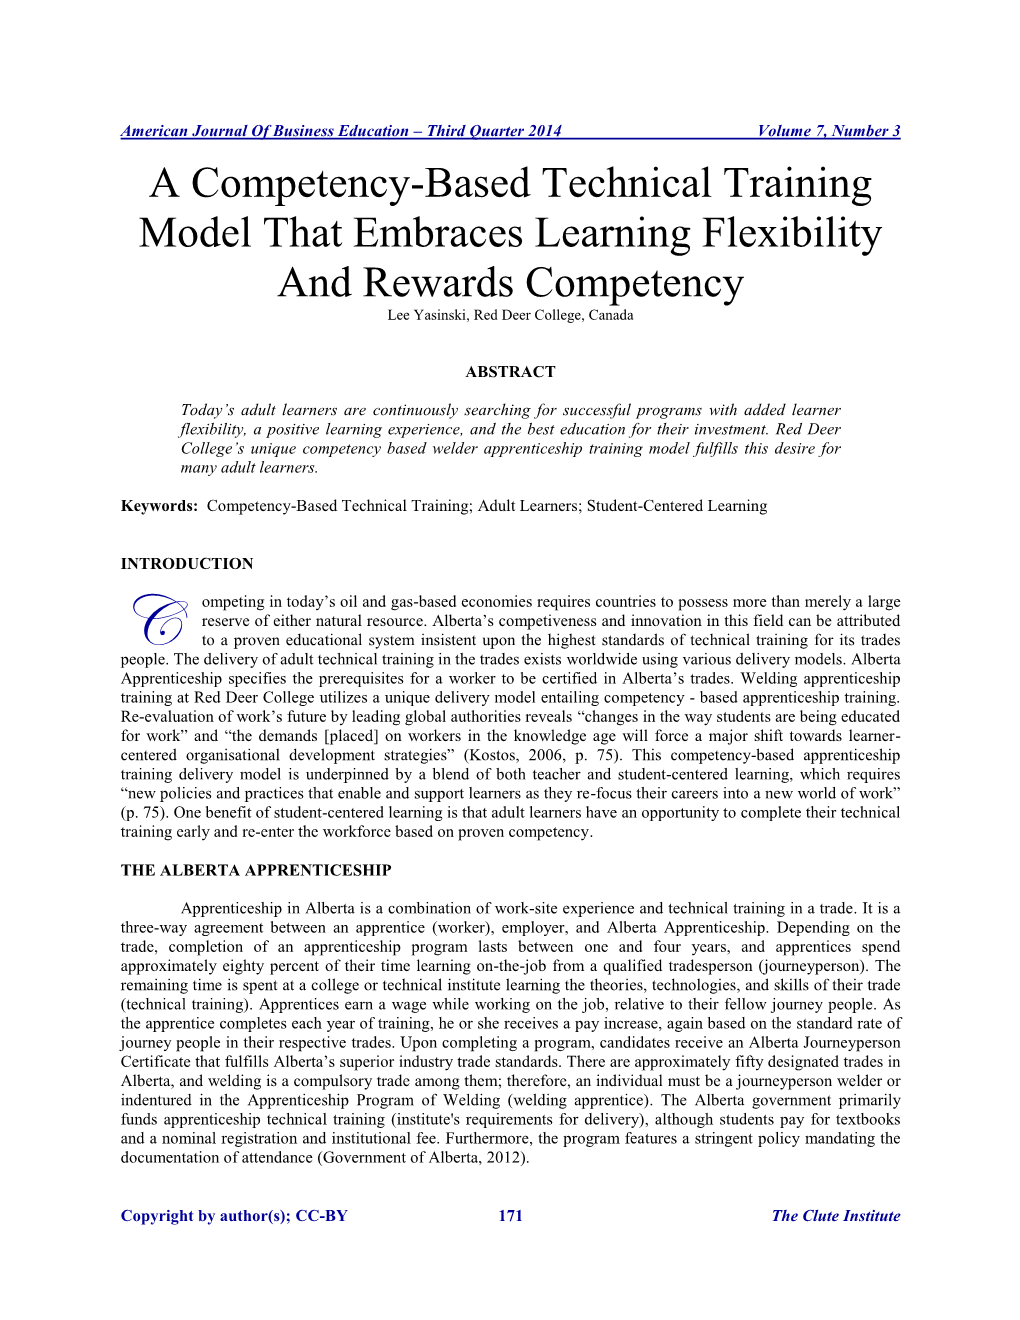 A Competency-Based Technical Training Model That Embraces Learning Flexibility and Rewards Competency Lee Yasinski, Red Deer College, Canada